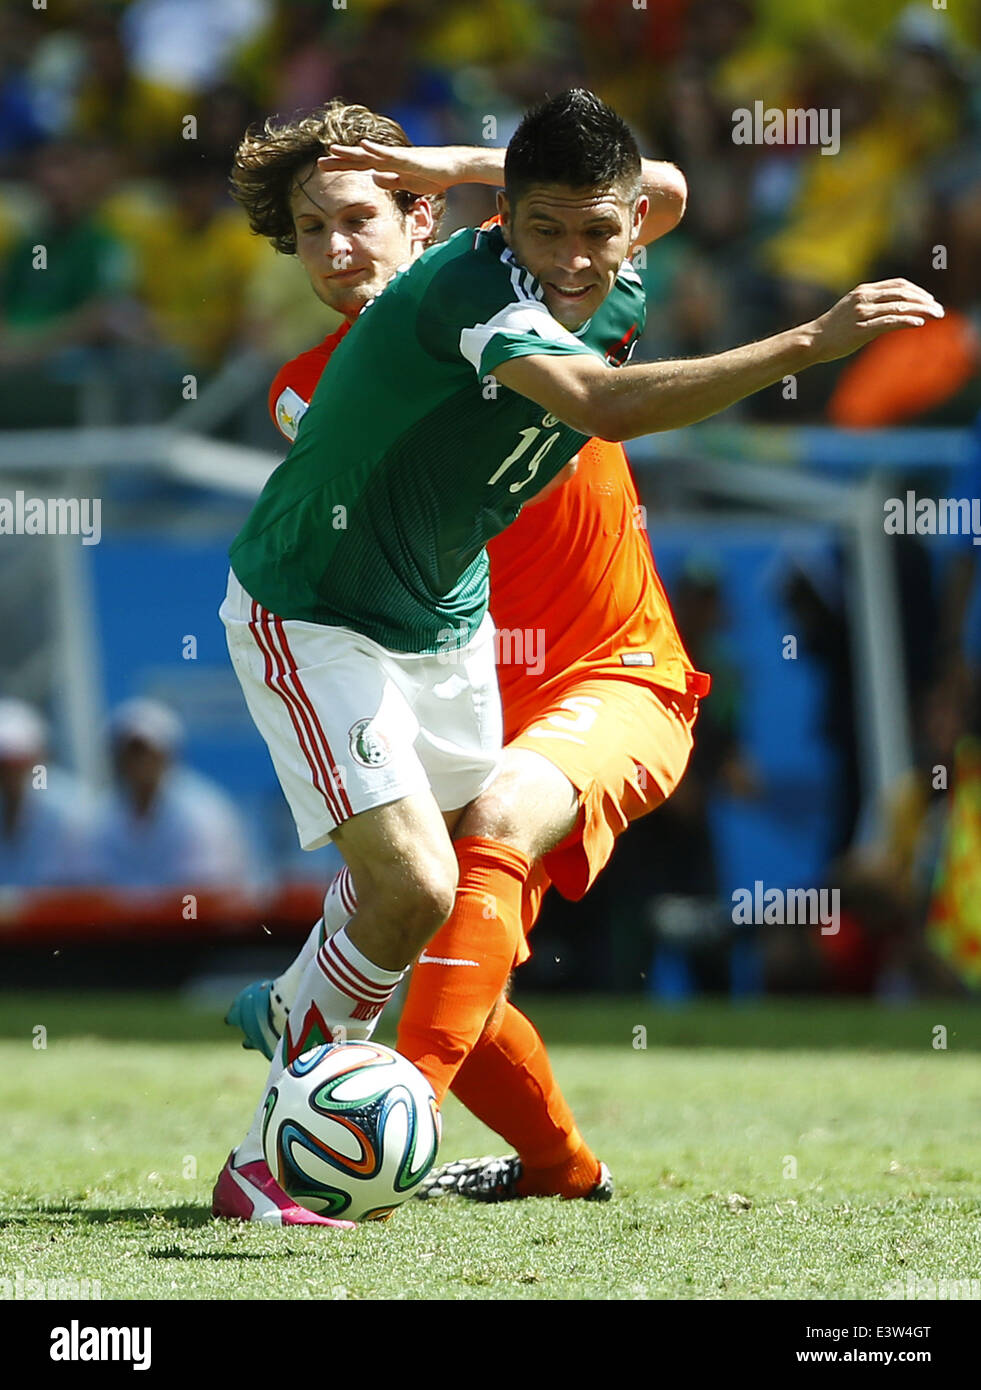 Fortaleza, Brazil. 29th June, 2014. Mexico's Oribe Peralta (front) competes during a Round of 16 match between Netherlands and Mexico of 2014 FIFA World Cup at the Estadio Castelao Stadium in Fortaleza, Brazil, on June 29, 2014. Credit:  Chen Jianli/Xinhua/Alamy Live News Stock Photo